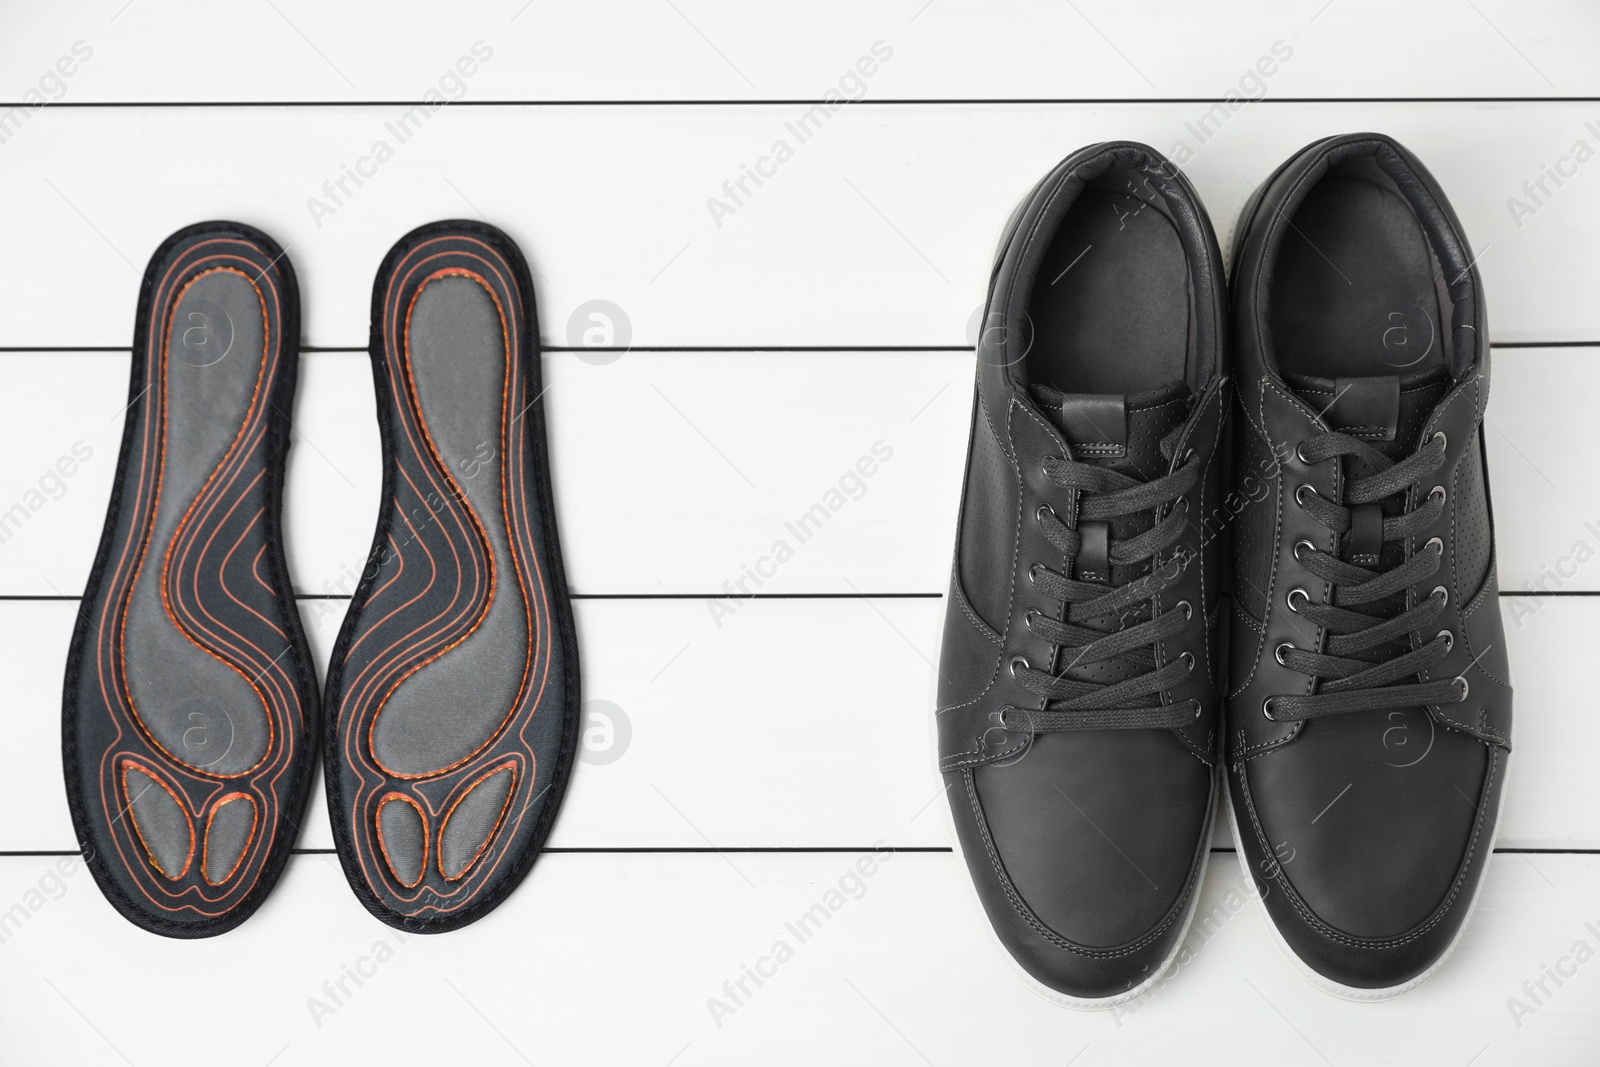 Photo of Orthopedic insoles near shoes on white wooden floor, flat lay